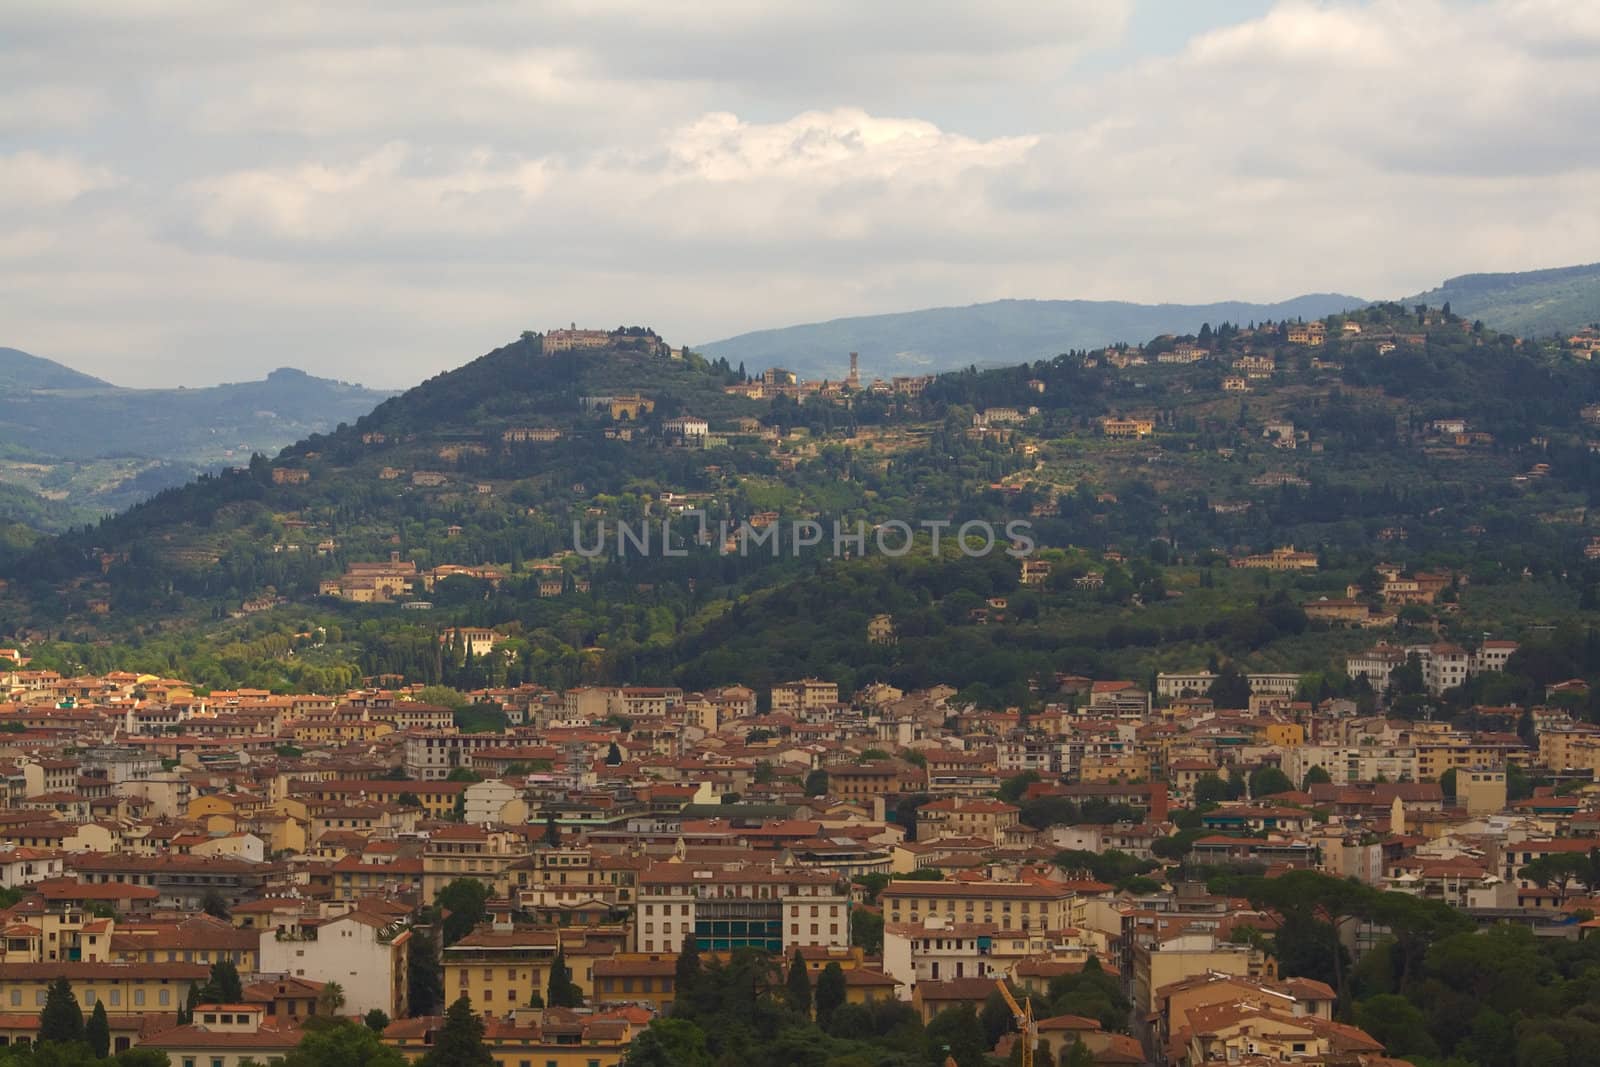 Overview of Florence, with towers and hills on the distance